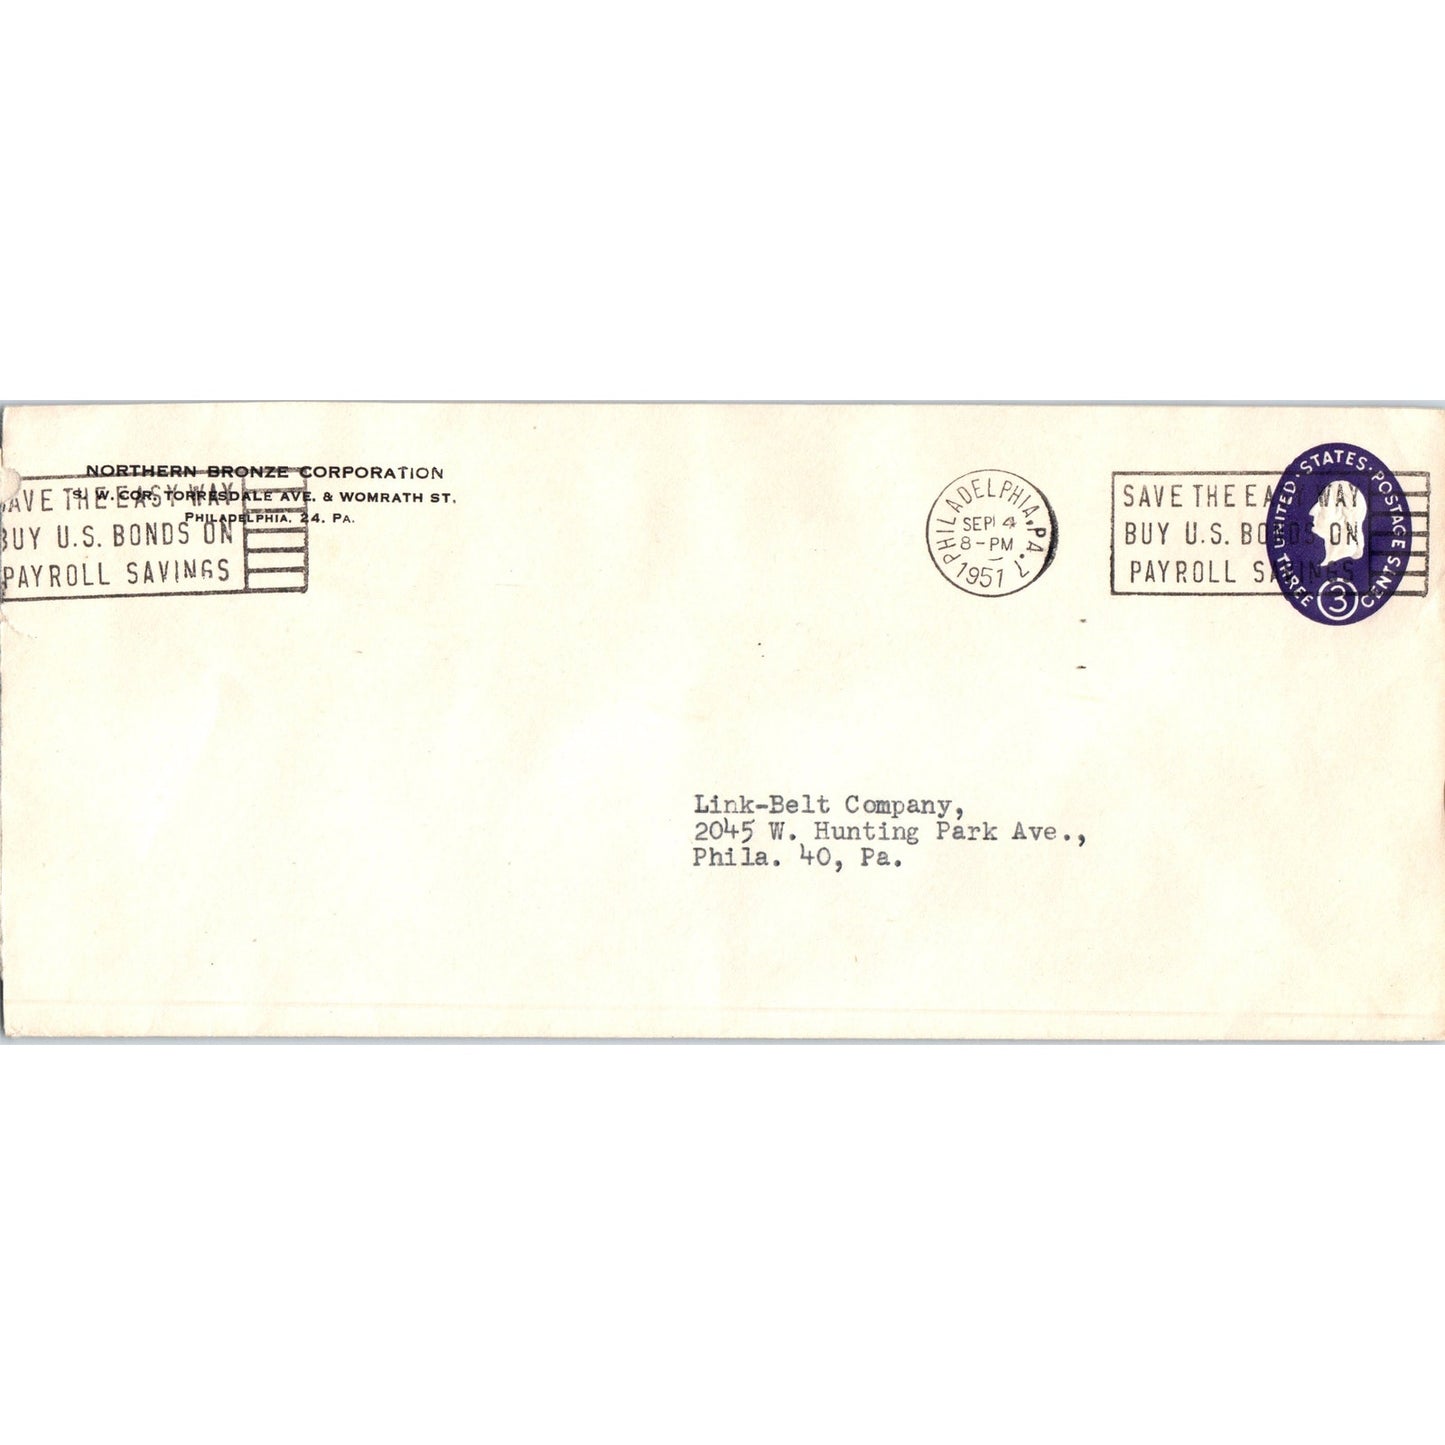 1951 Northern Bronze Corp to Link-Belt Co Philadelphia Postal Cover TH9-L2